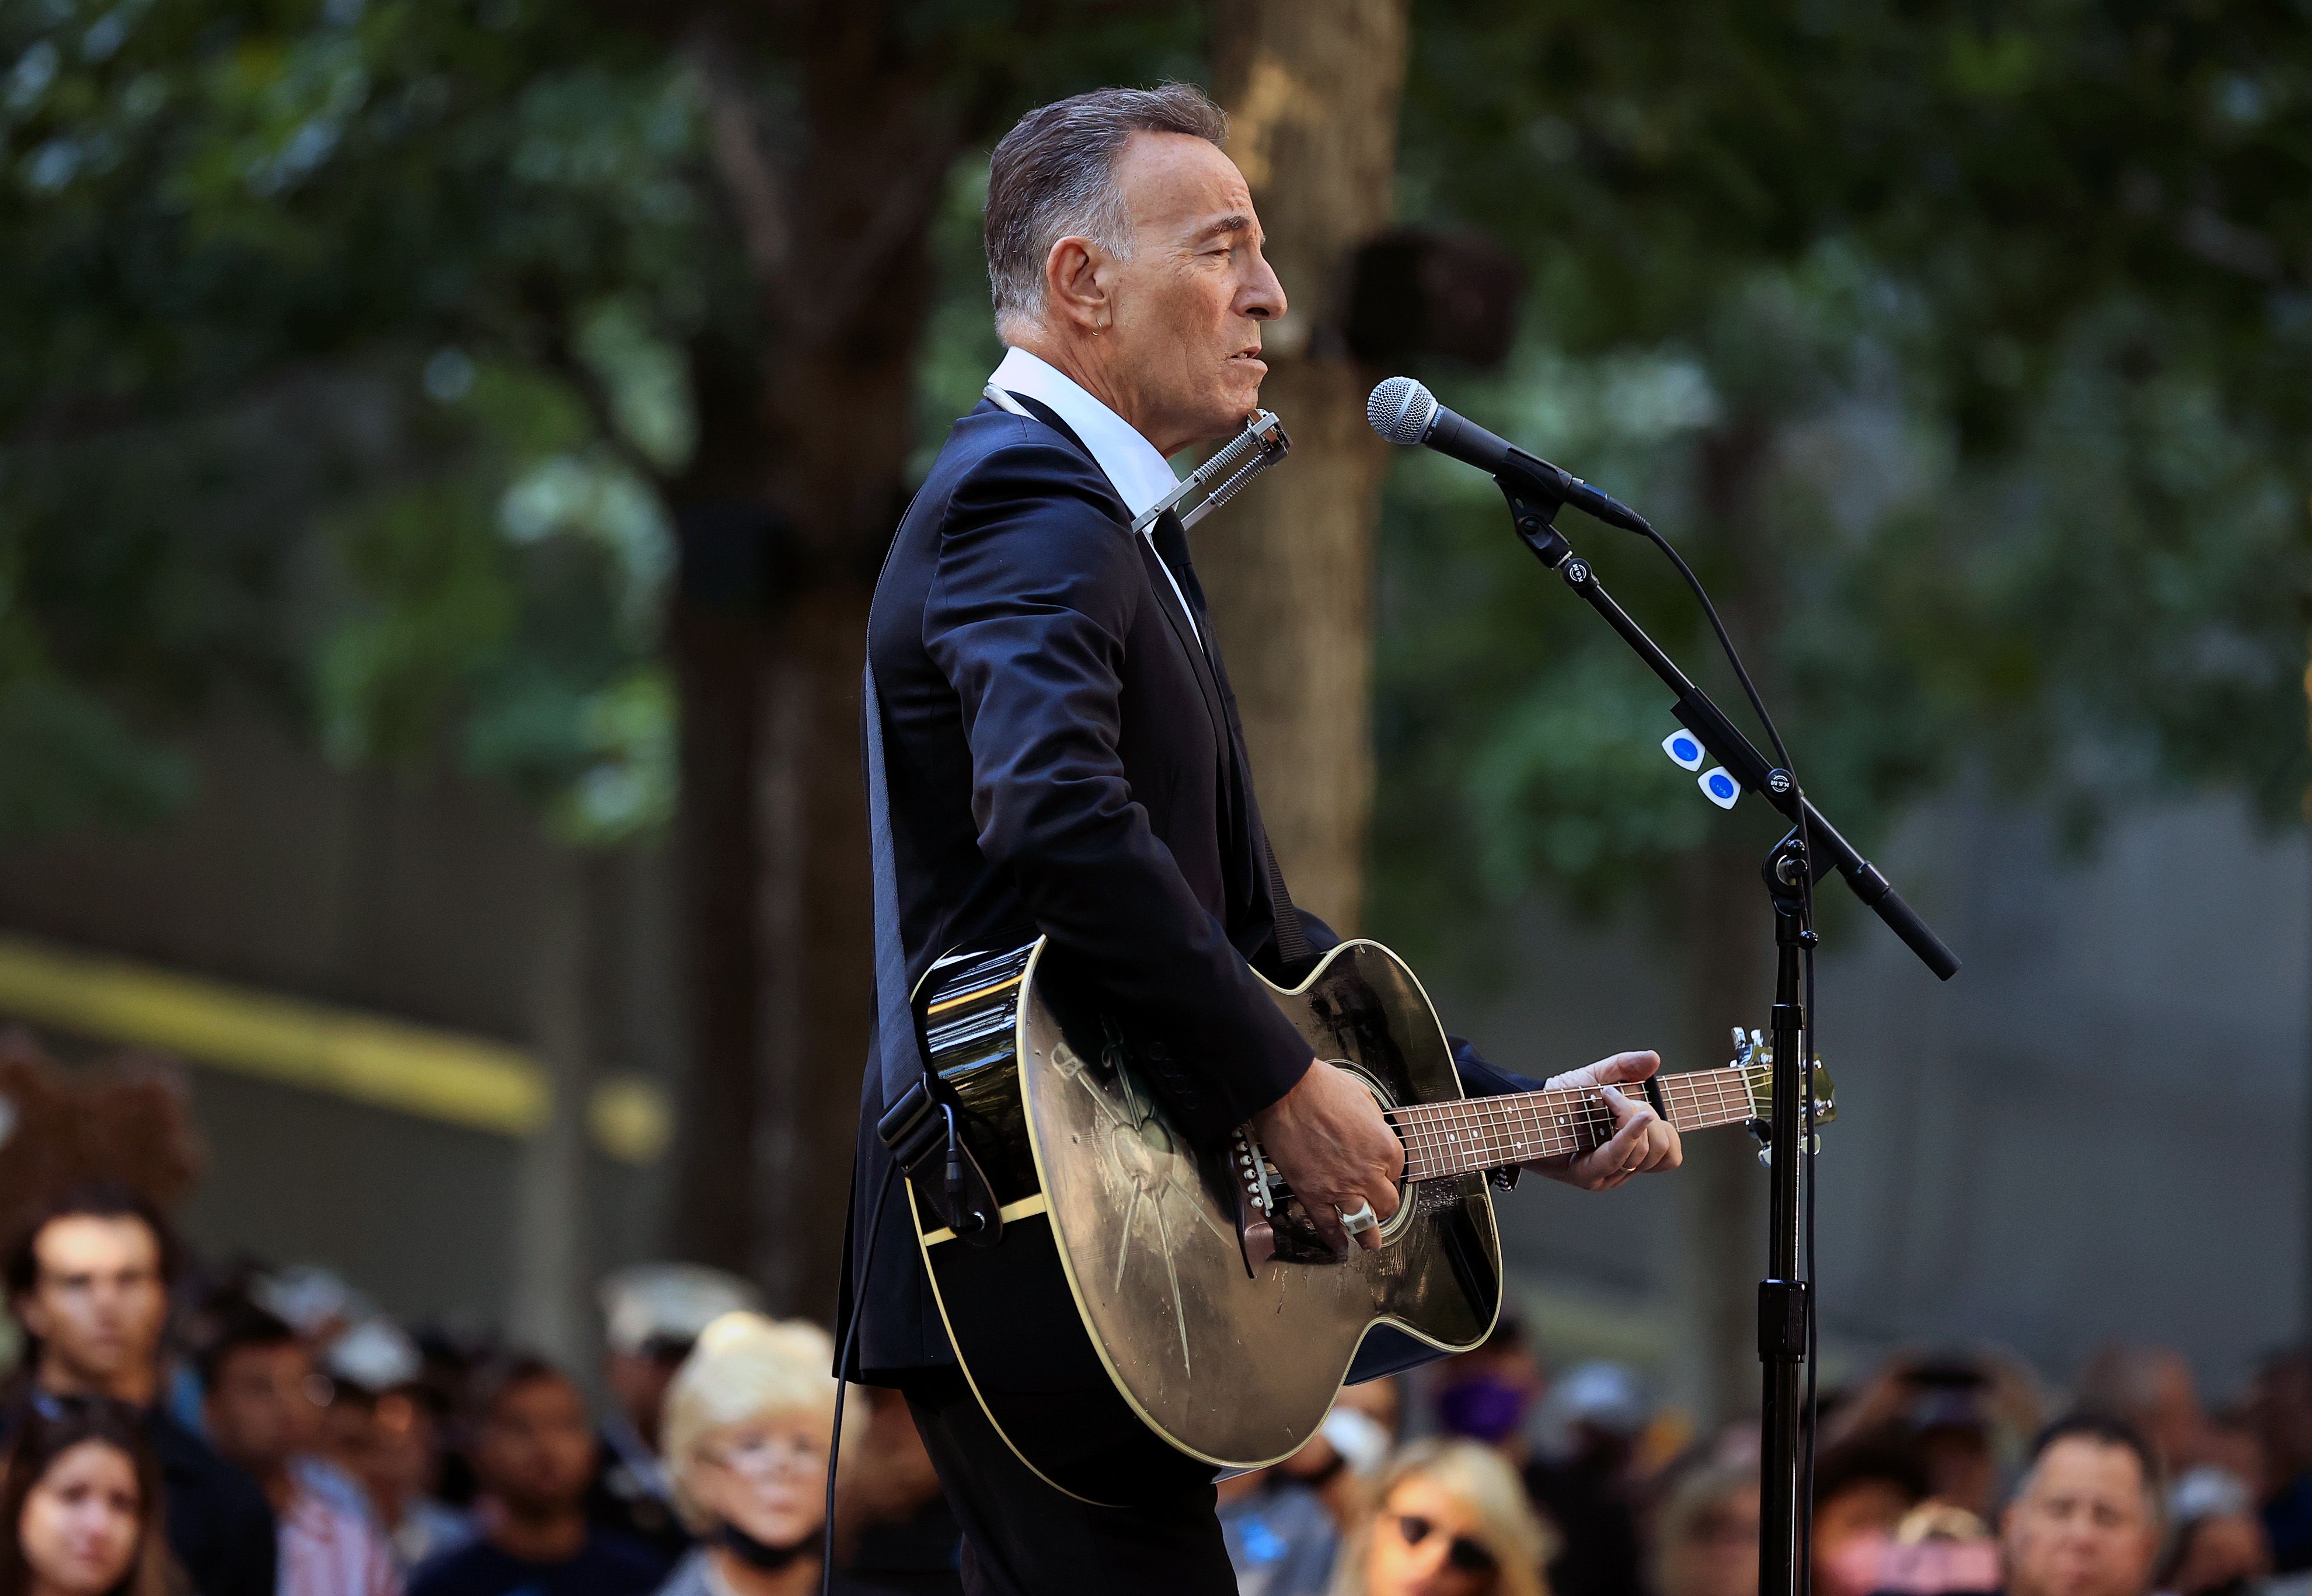 Bruce Springsteen performs during the annual 9/11 Commemoration Ceremony at the National 9/11 Memorial and Museum on September 11, 2021 in New York City